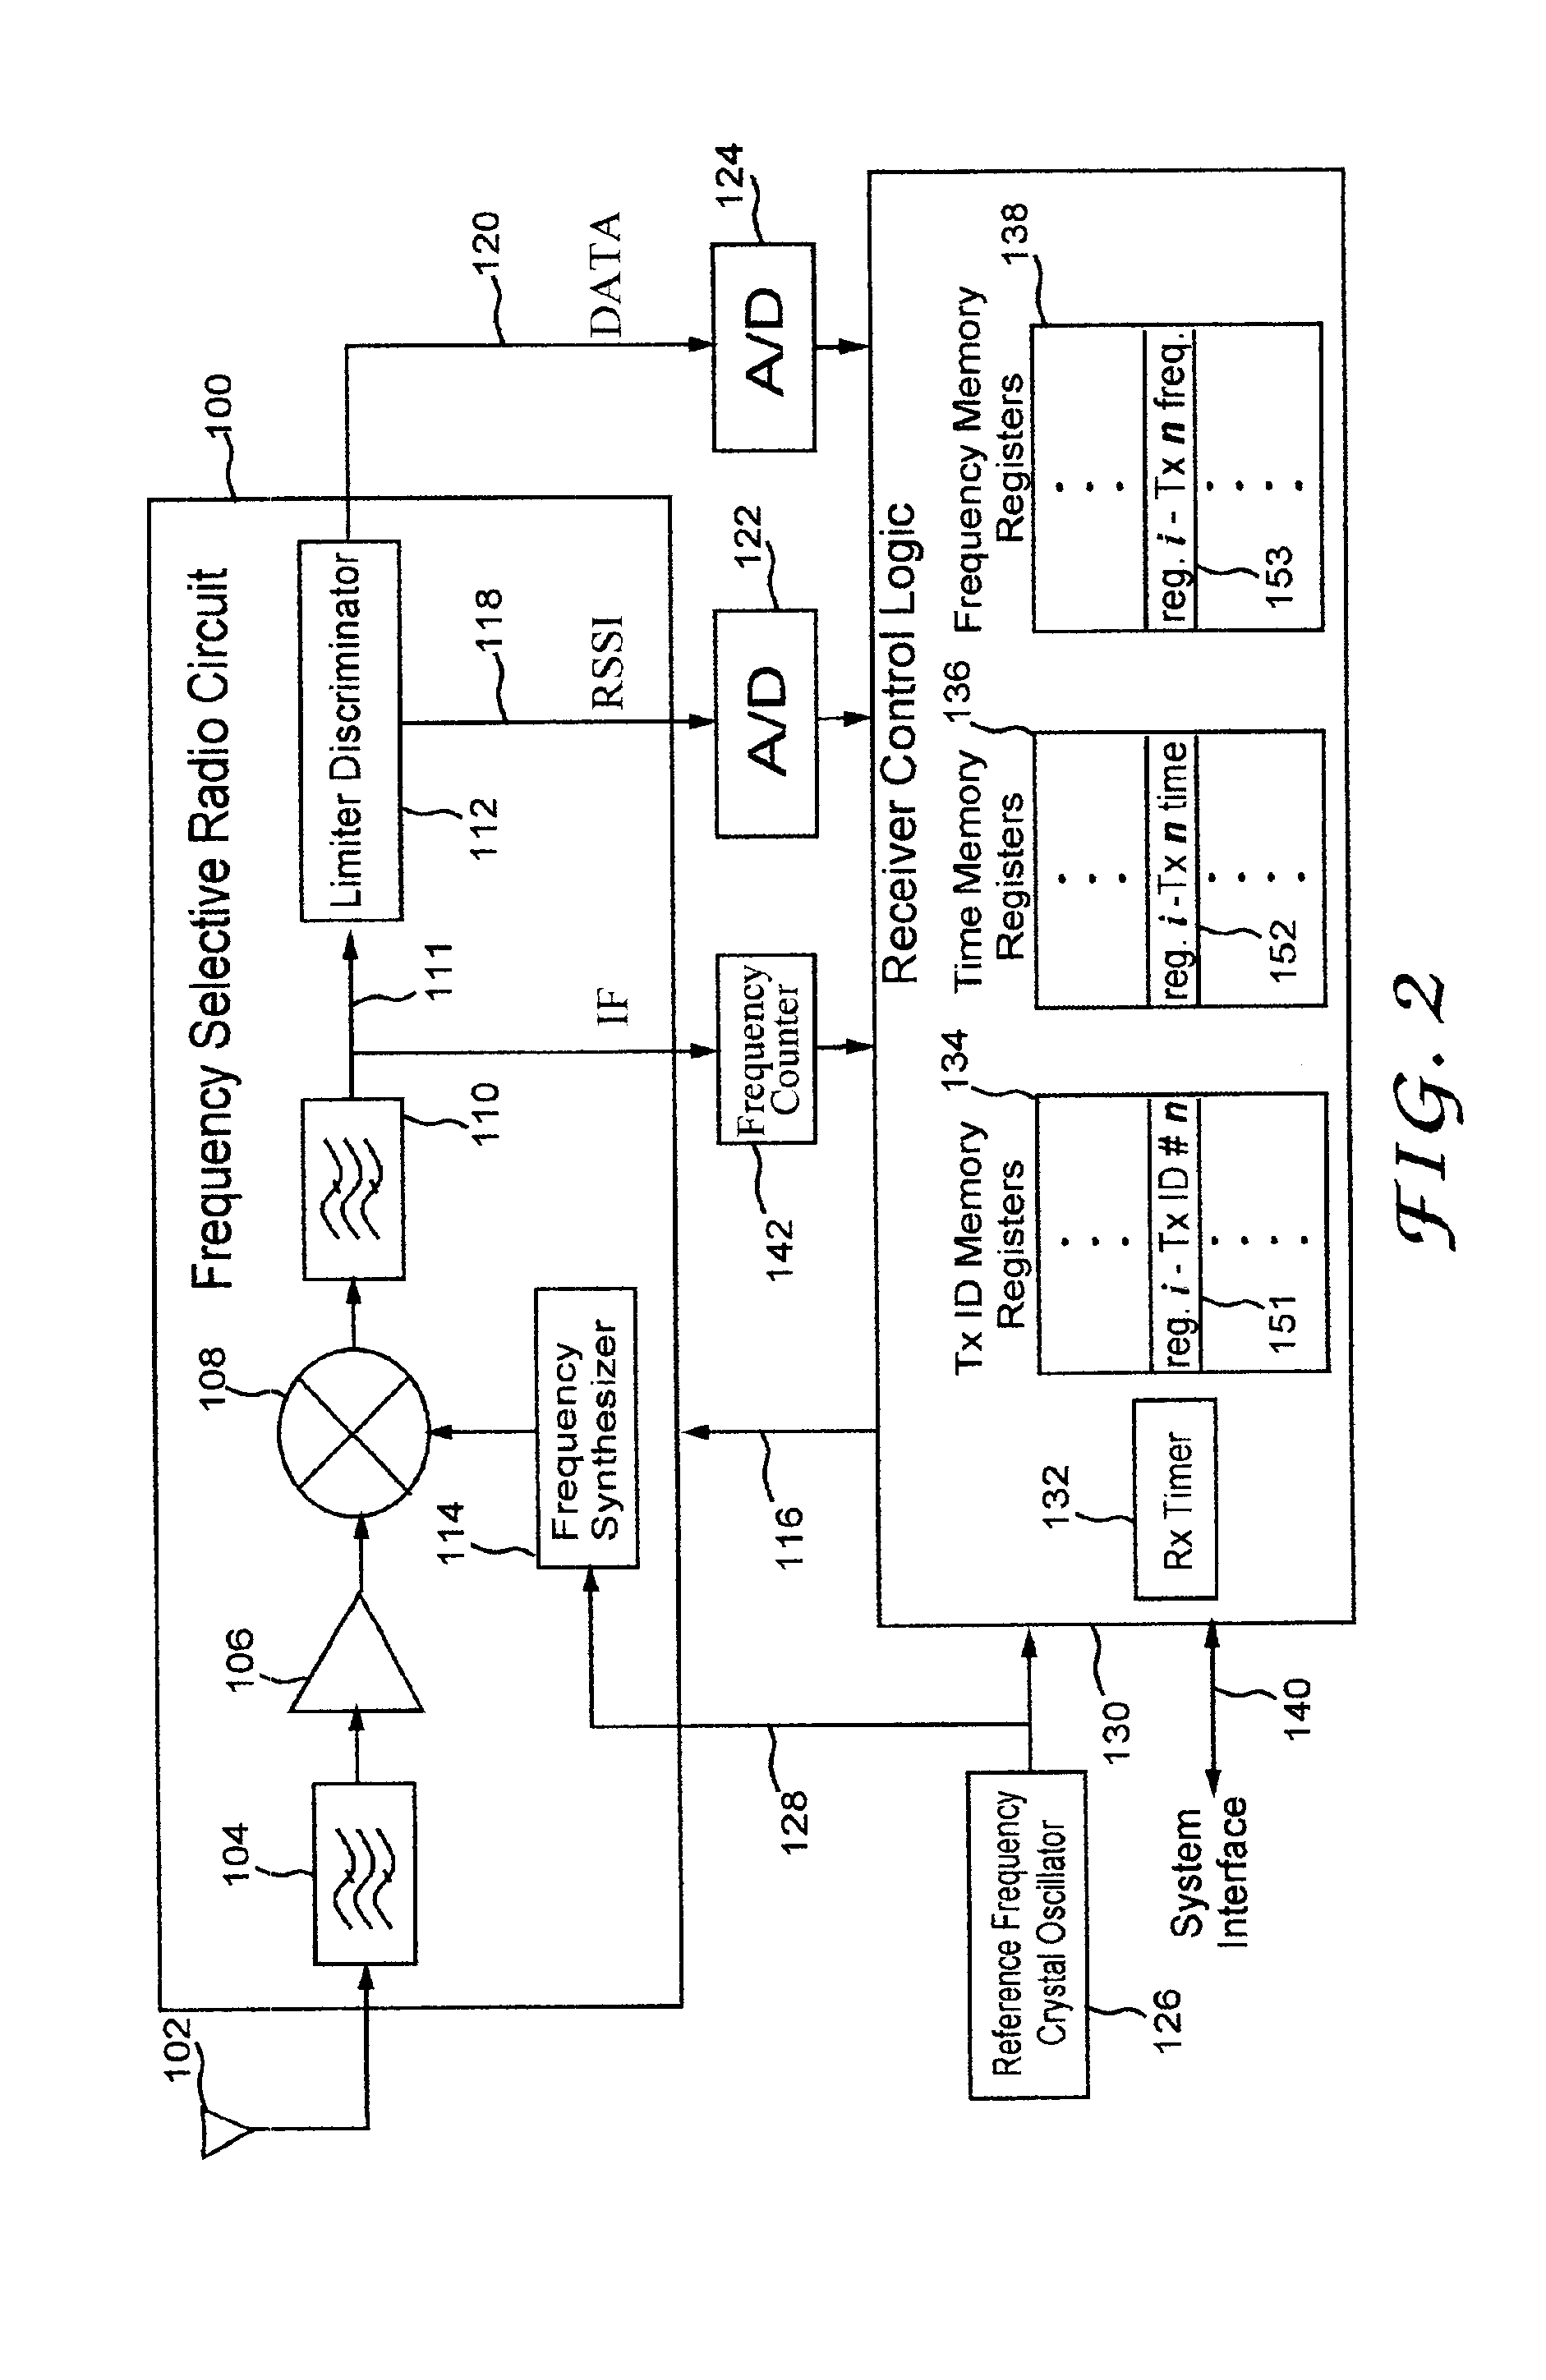 Transmission of urgent messages in frequency hopping system for intermittent transmission